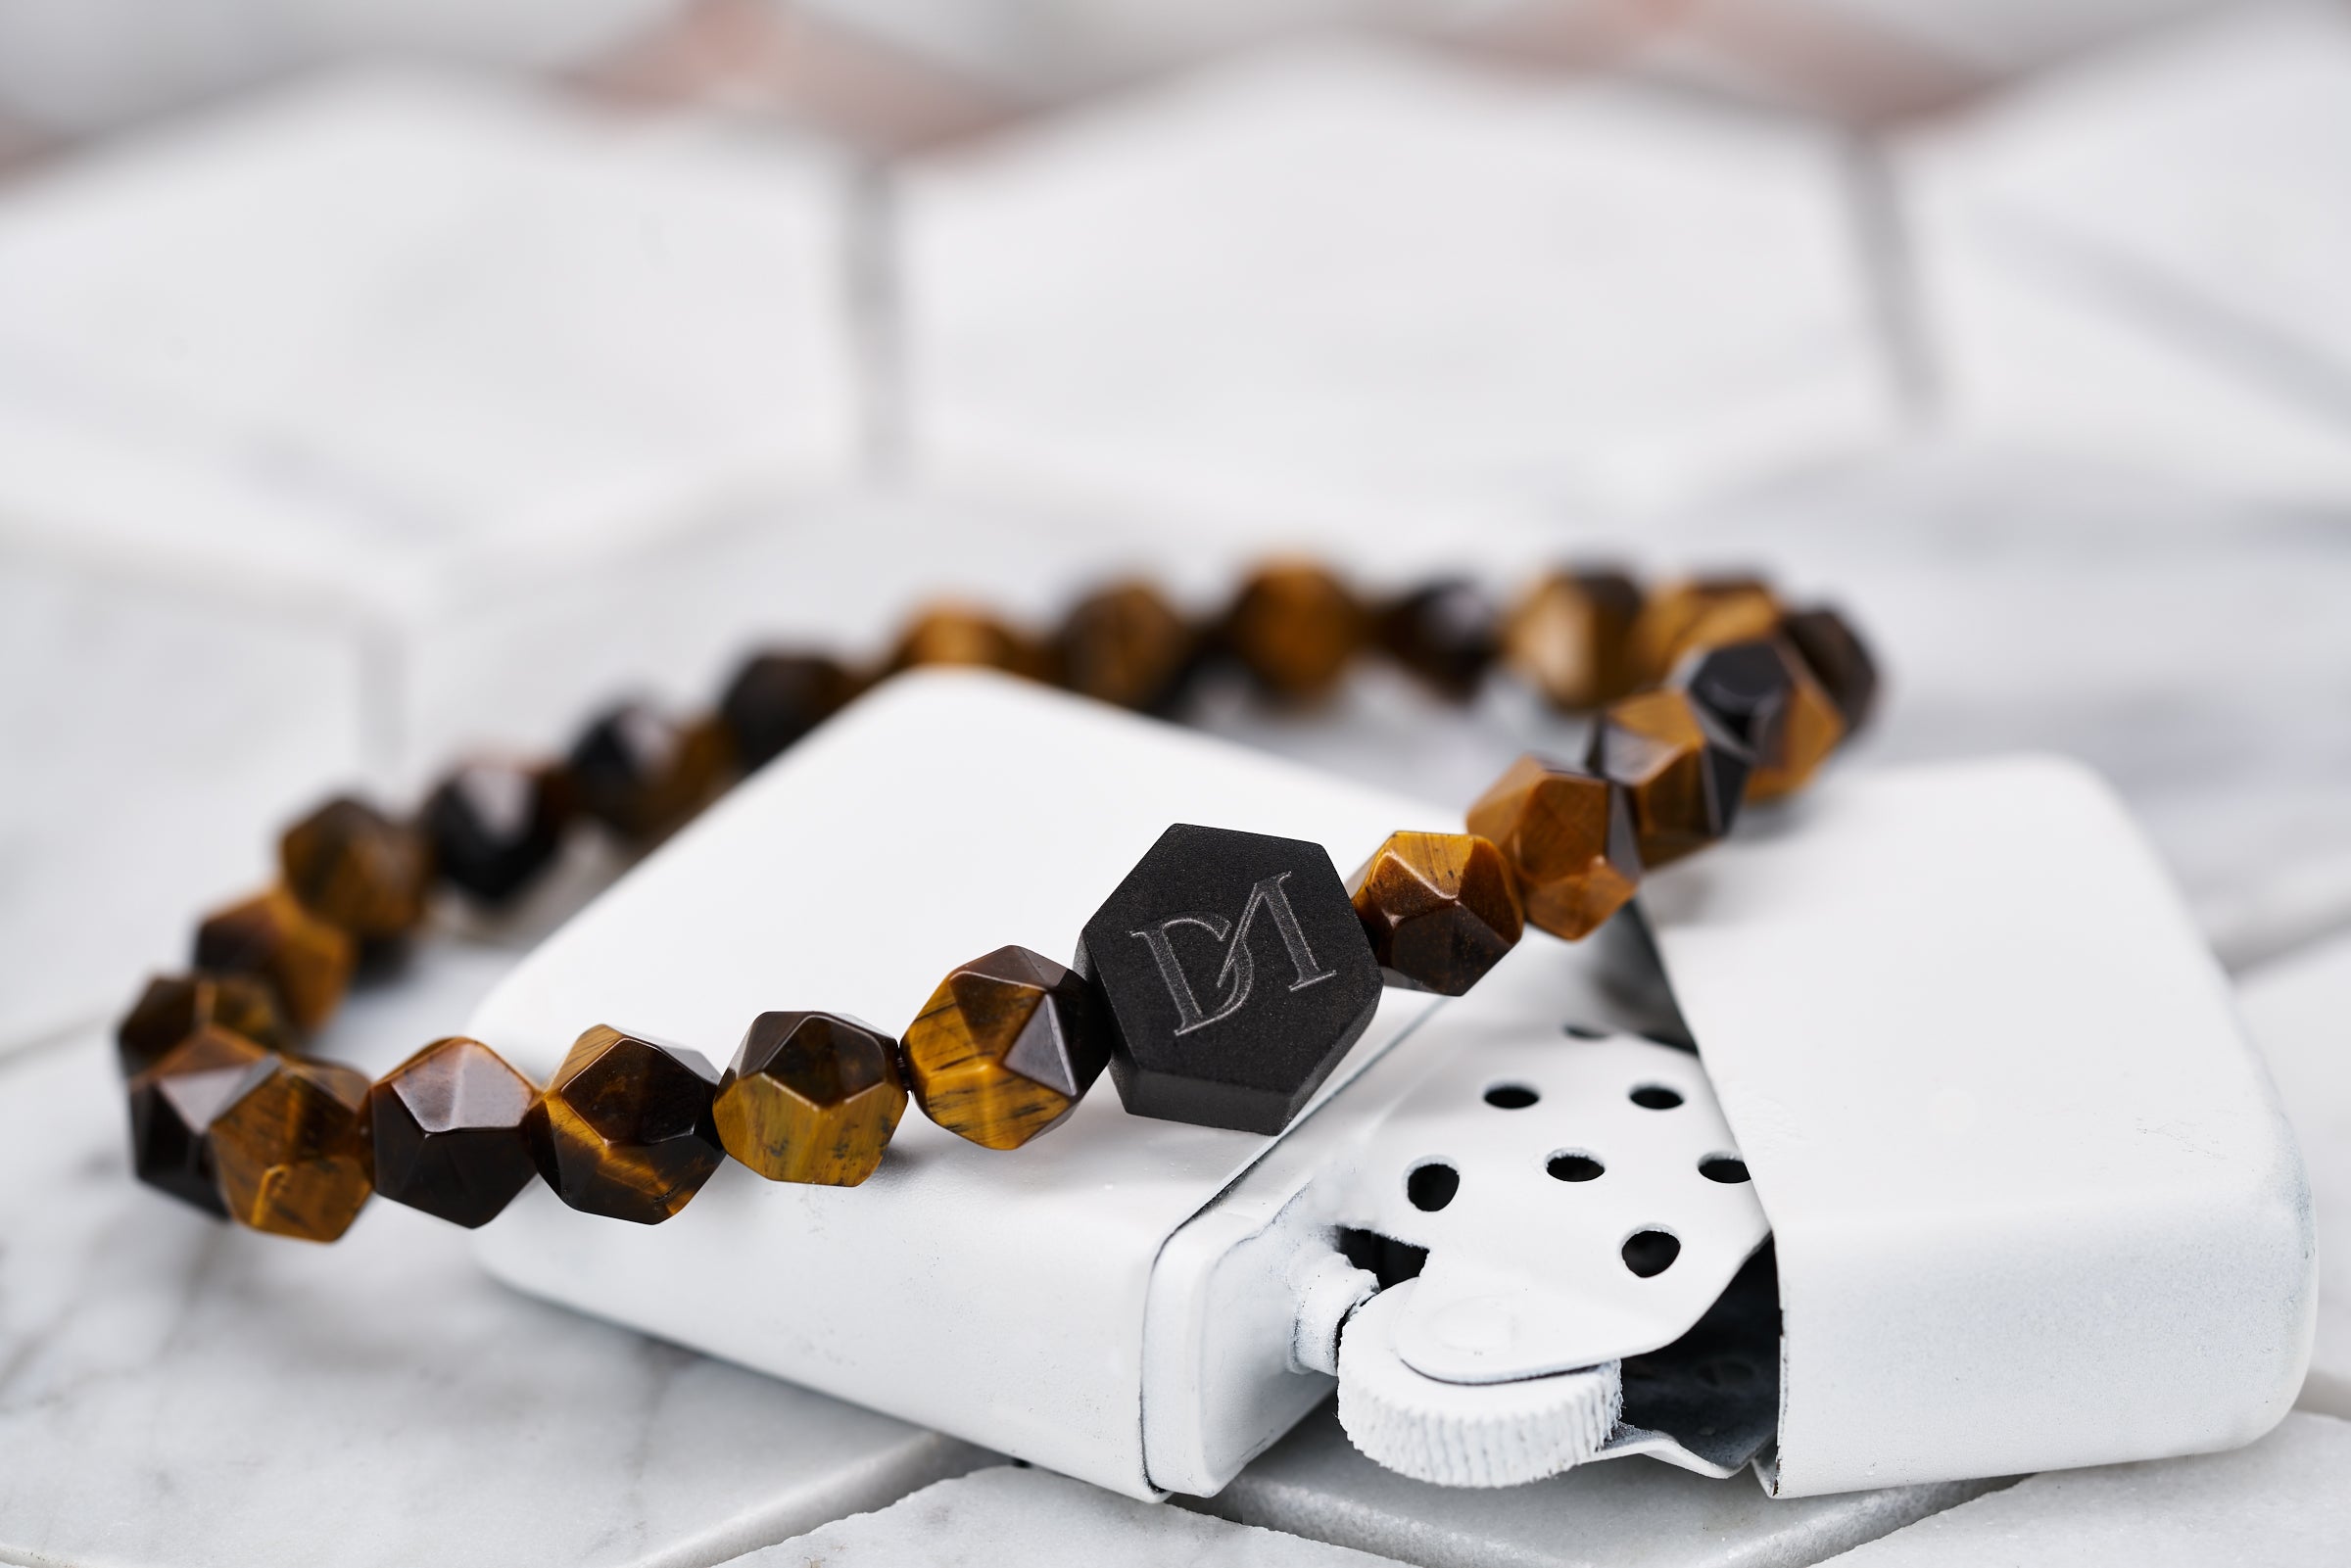 An image of the tiger eye stone bead bracelet by Dear Martian sitting on top of a white zippo lighter.